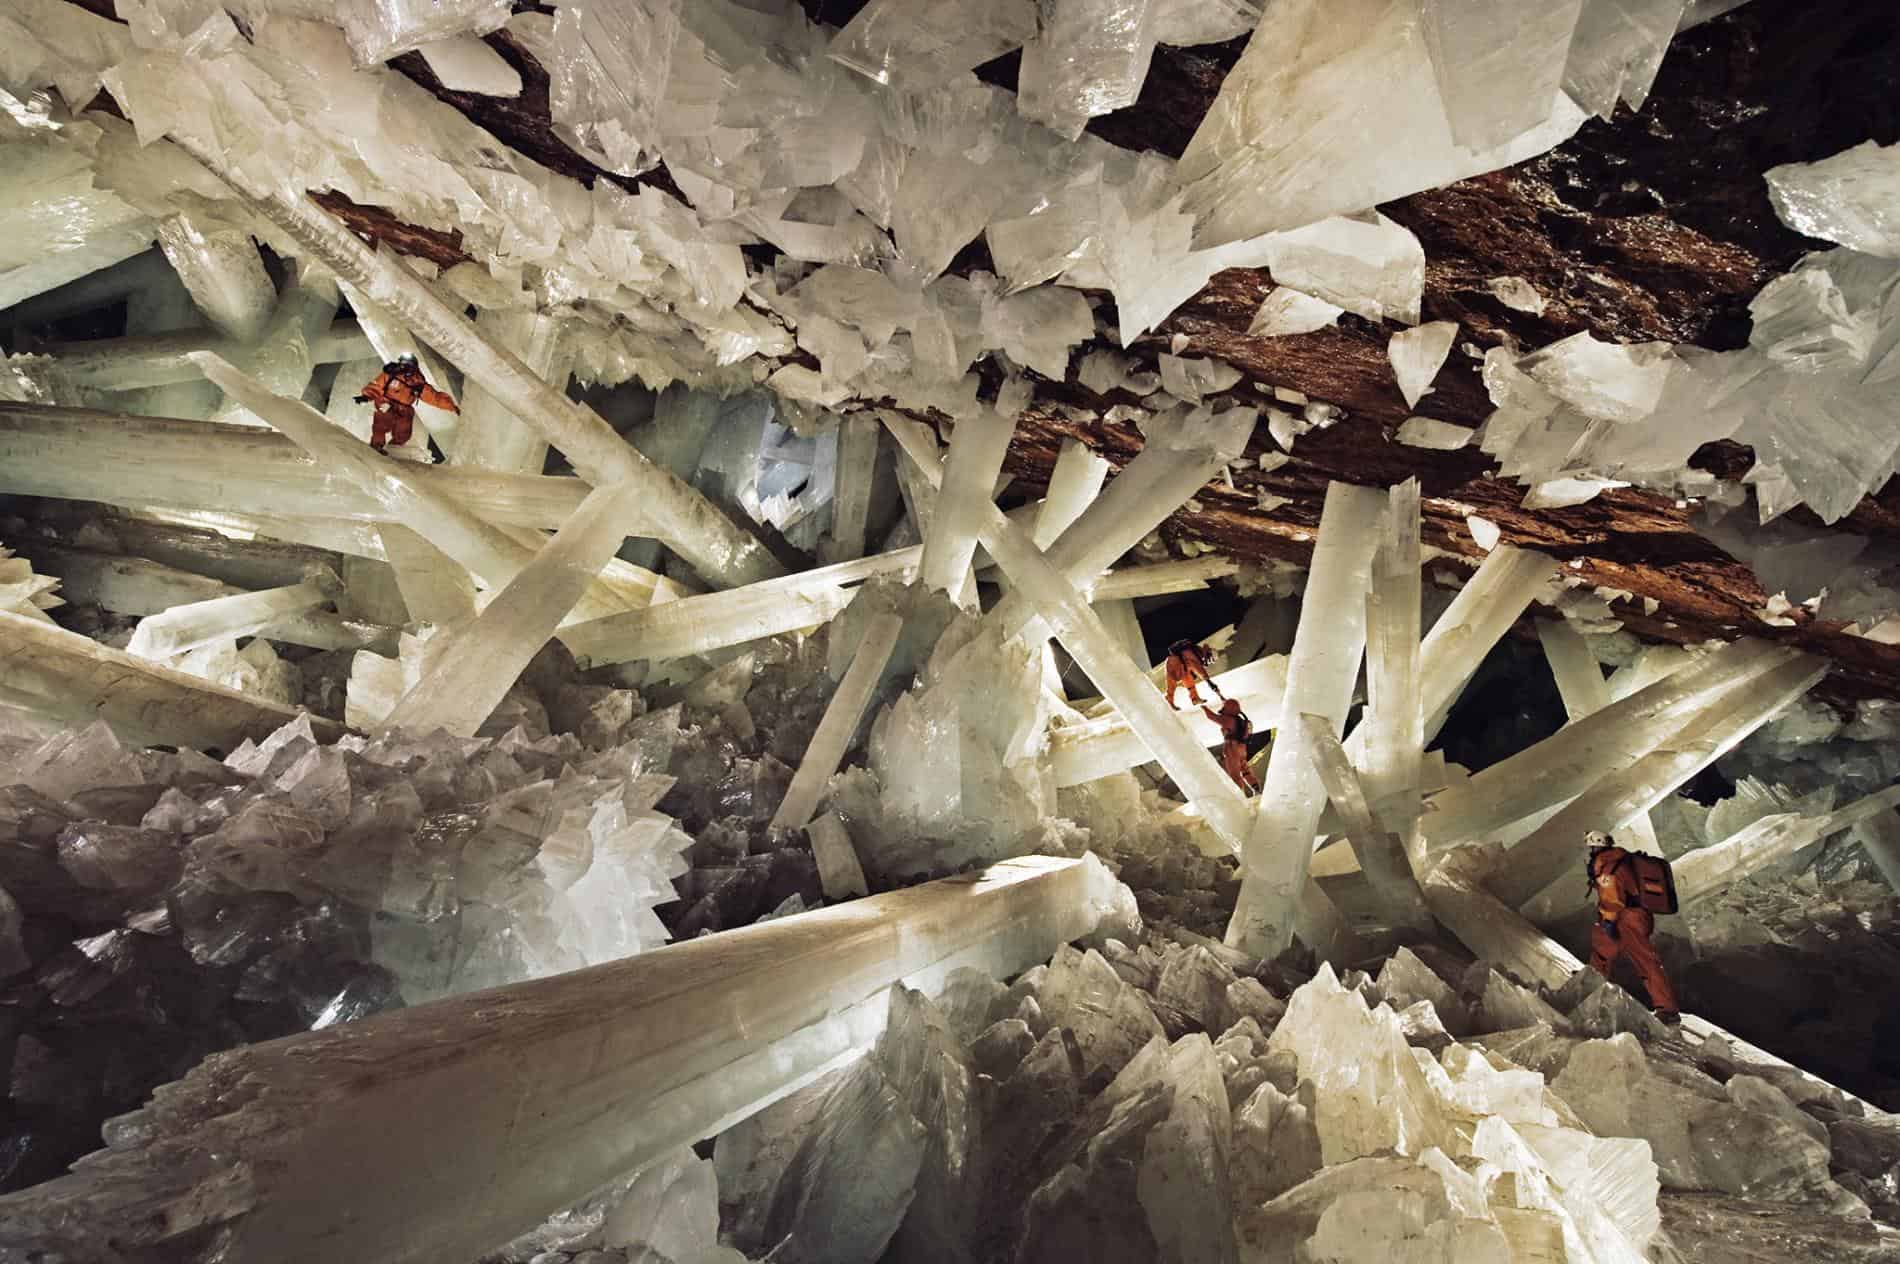 You won't believe what scientists found inside 50,000-year-old crystals